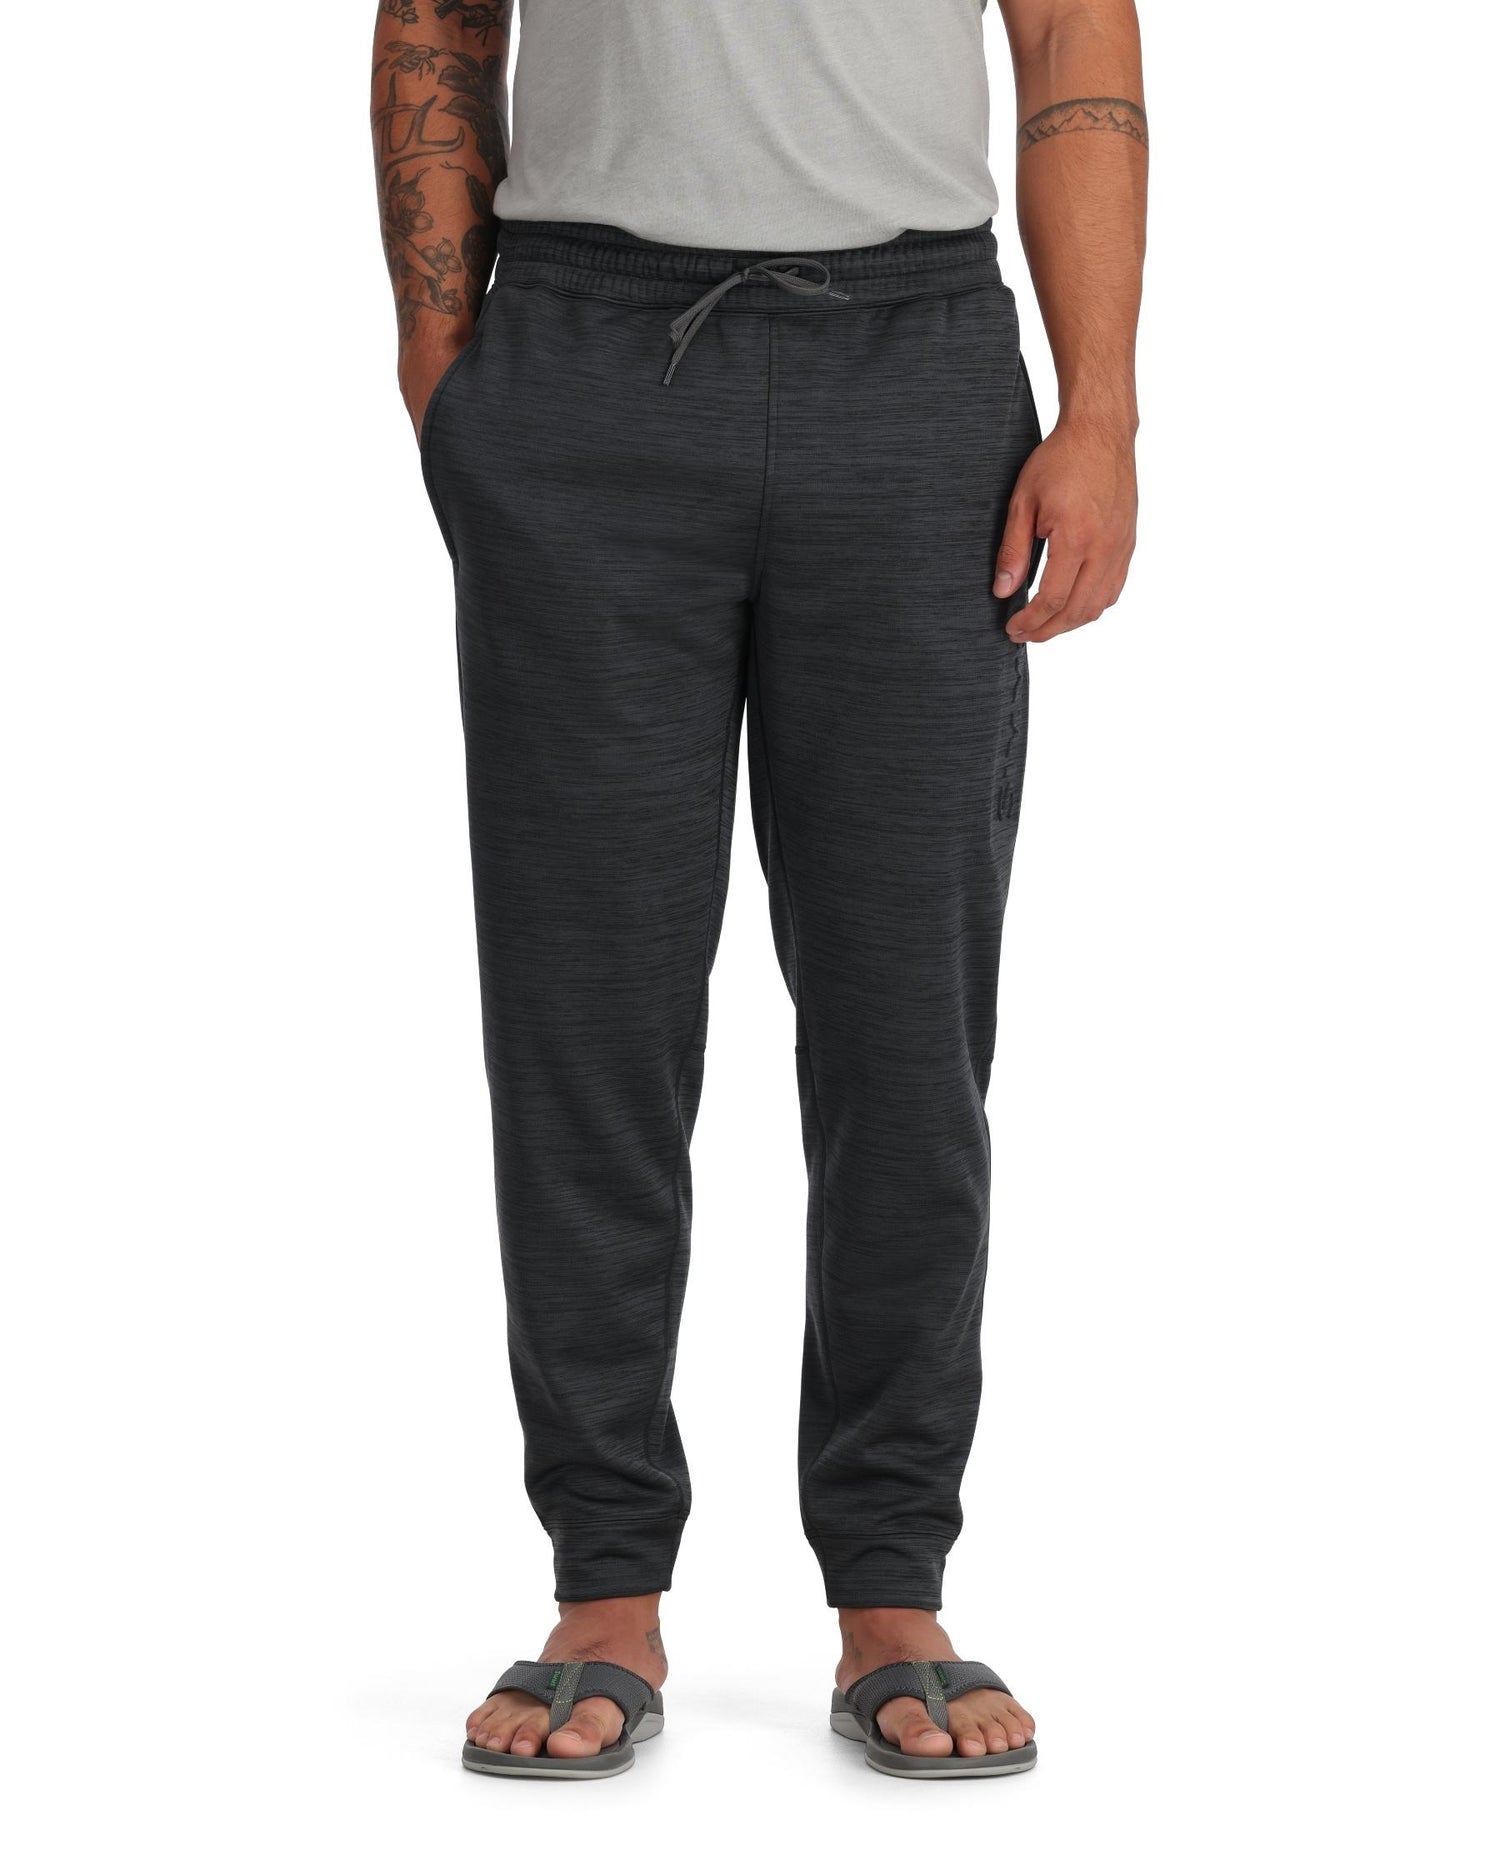 13857-010-Simms-Challenger-Sweatpants-Model-F23_CO-Front -rollover